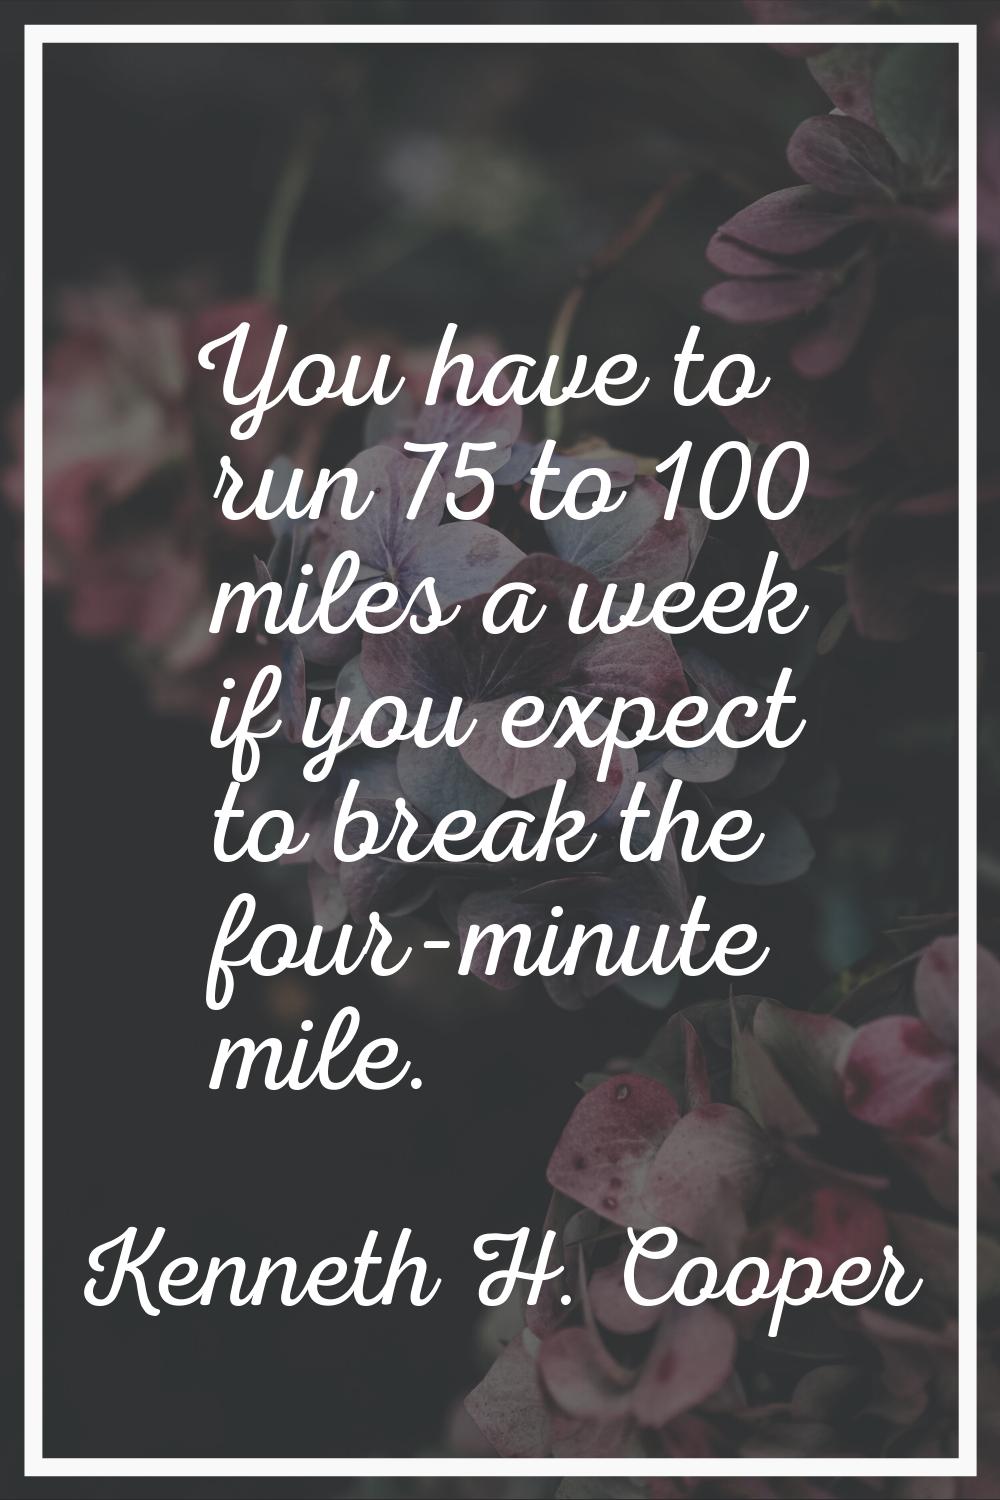 You have to run 75 to 100 miles a week if you expect to break the four-minute mile.